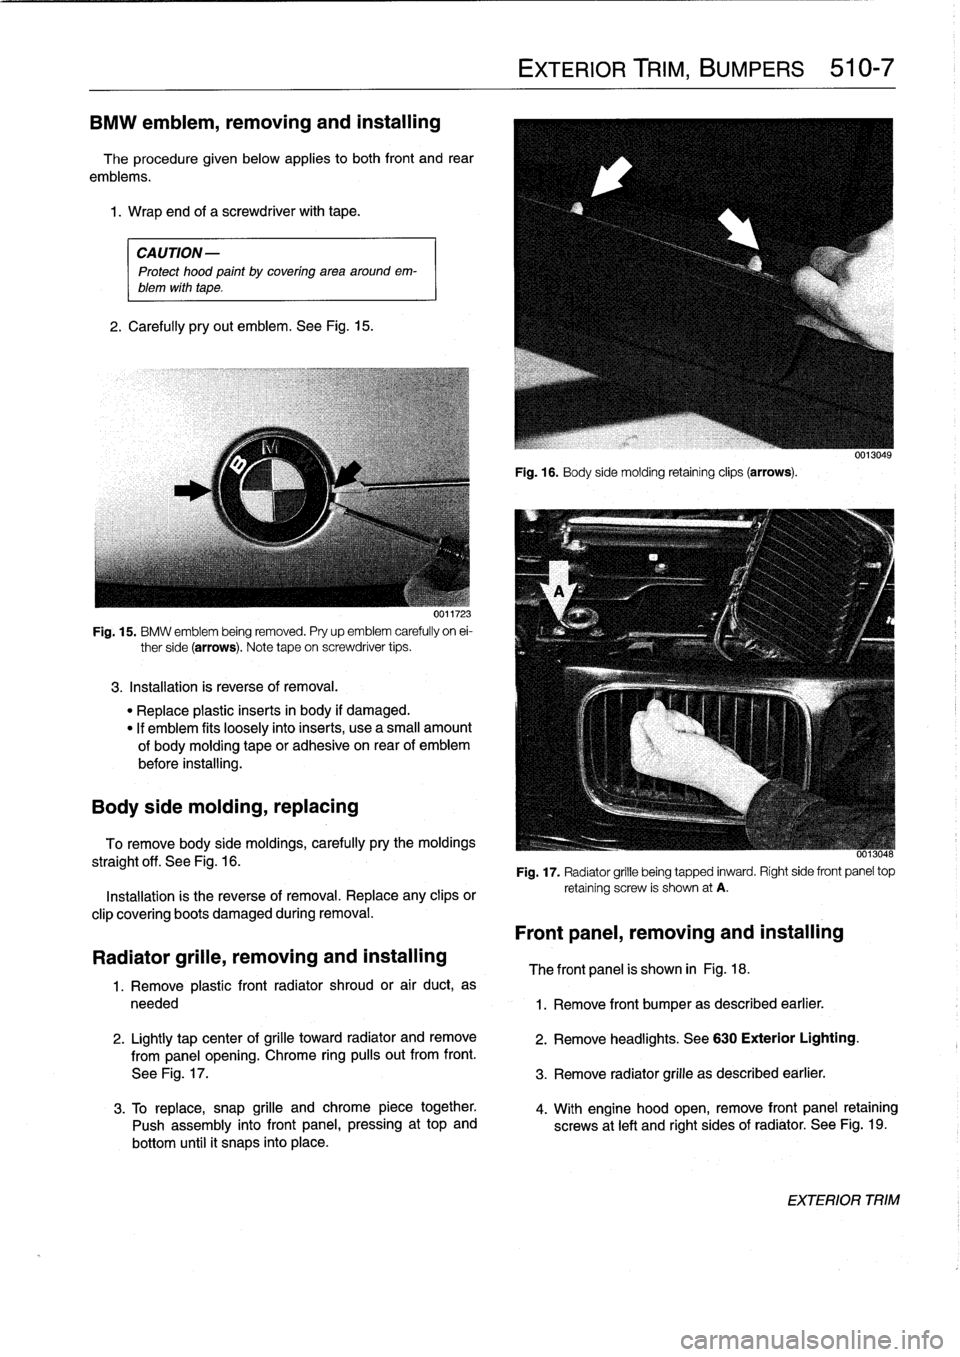 BMW 318i 1997 E36 Workshop Manual 
BMW
emblem,
removing
and
installing

The
procedure
given
below
applies
to
both
front
and
rear

emblems
.

1
.
Wrap
and
of
a
screwdriver
with
tape
.

CAUTION-

Protect
hood
paint
by
coveringarea
aroun